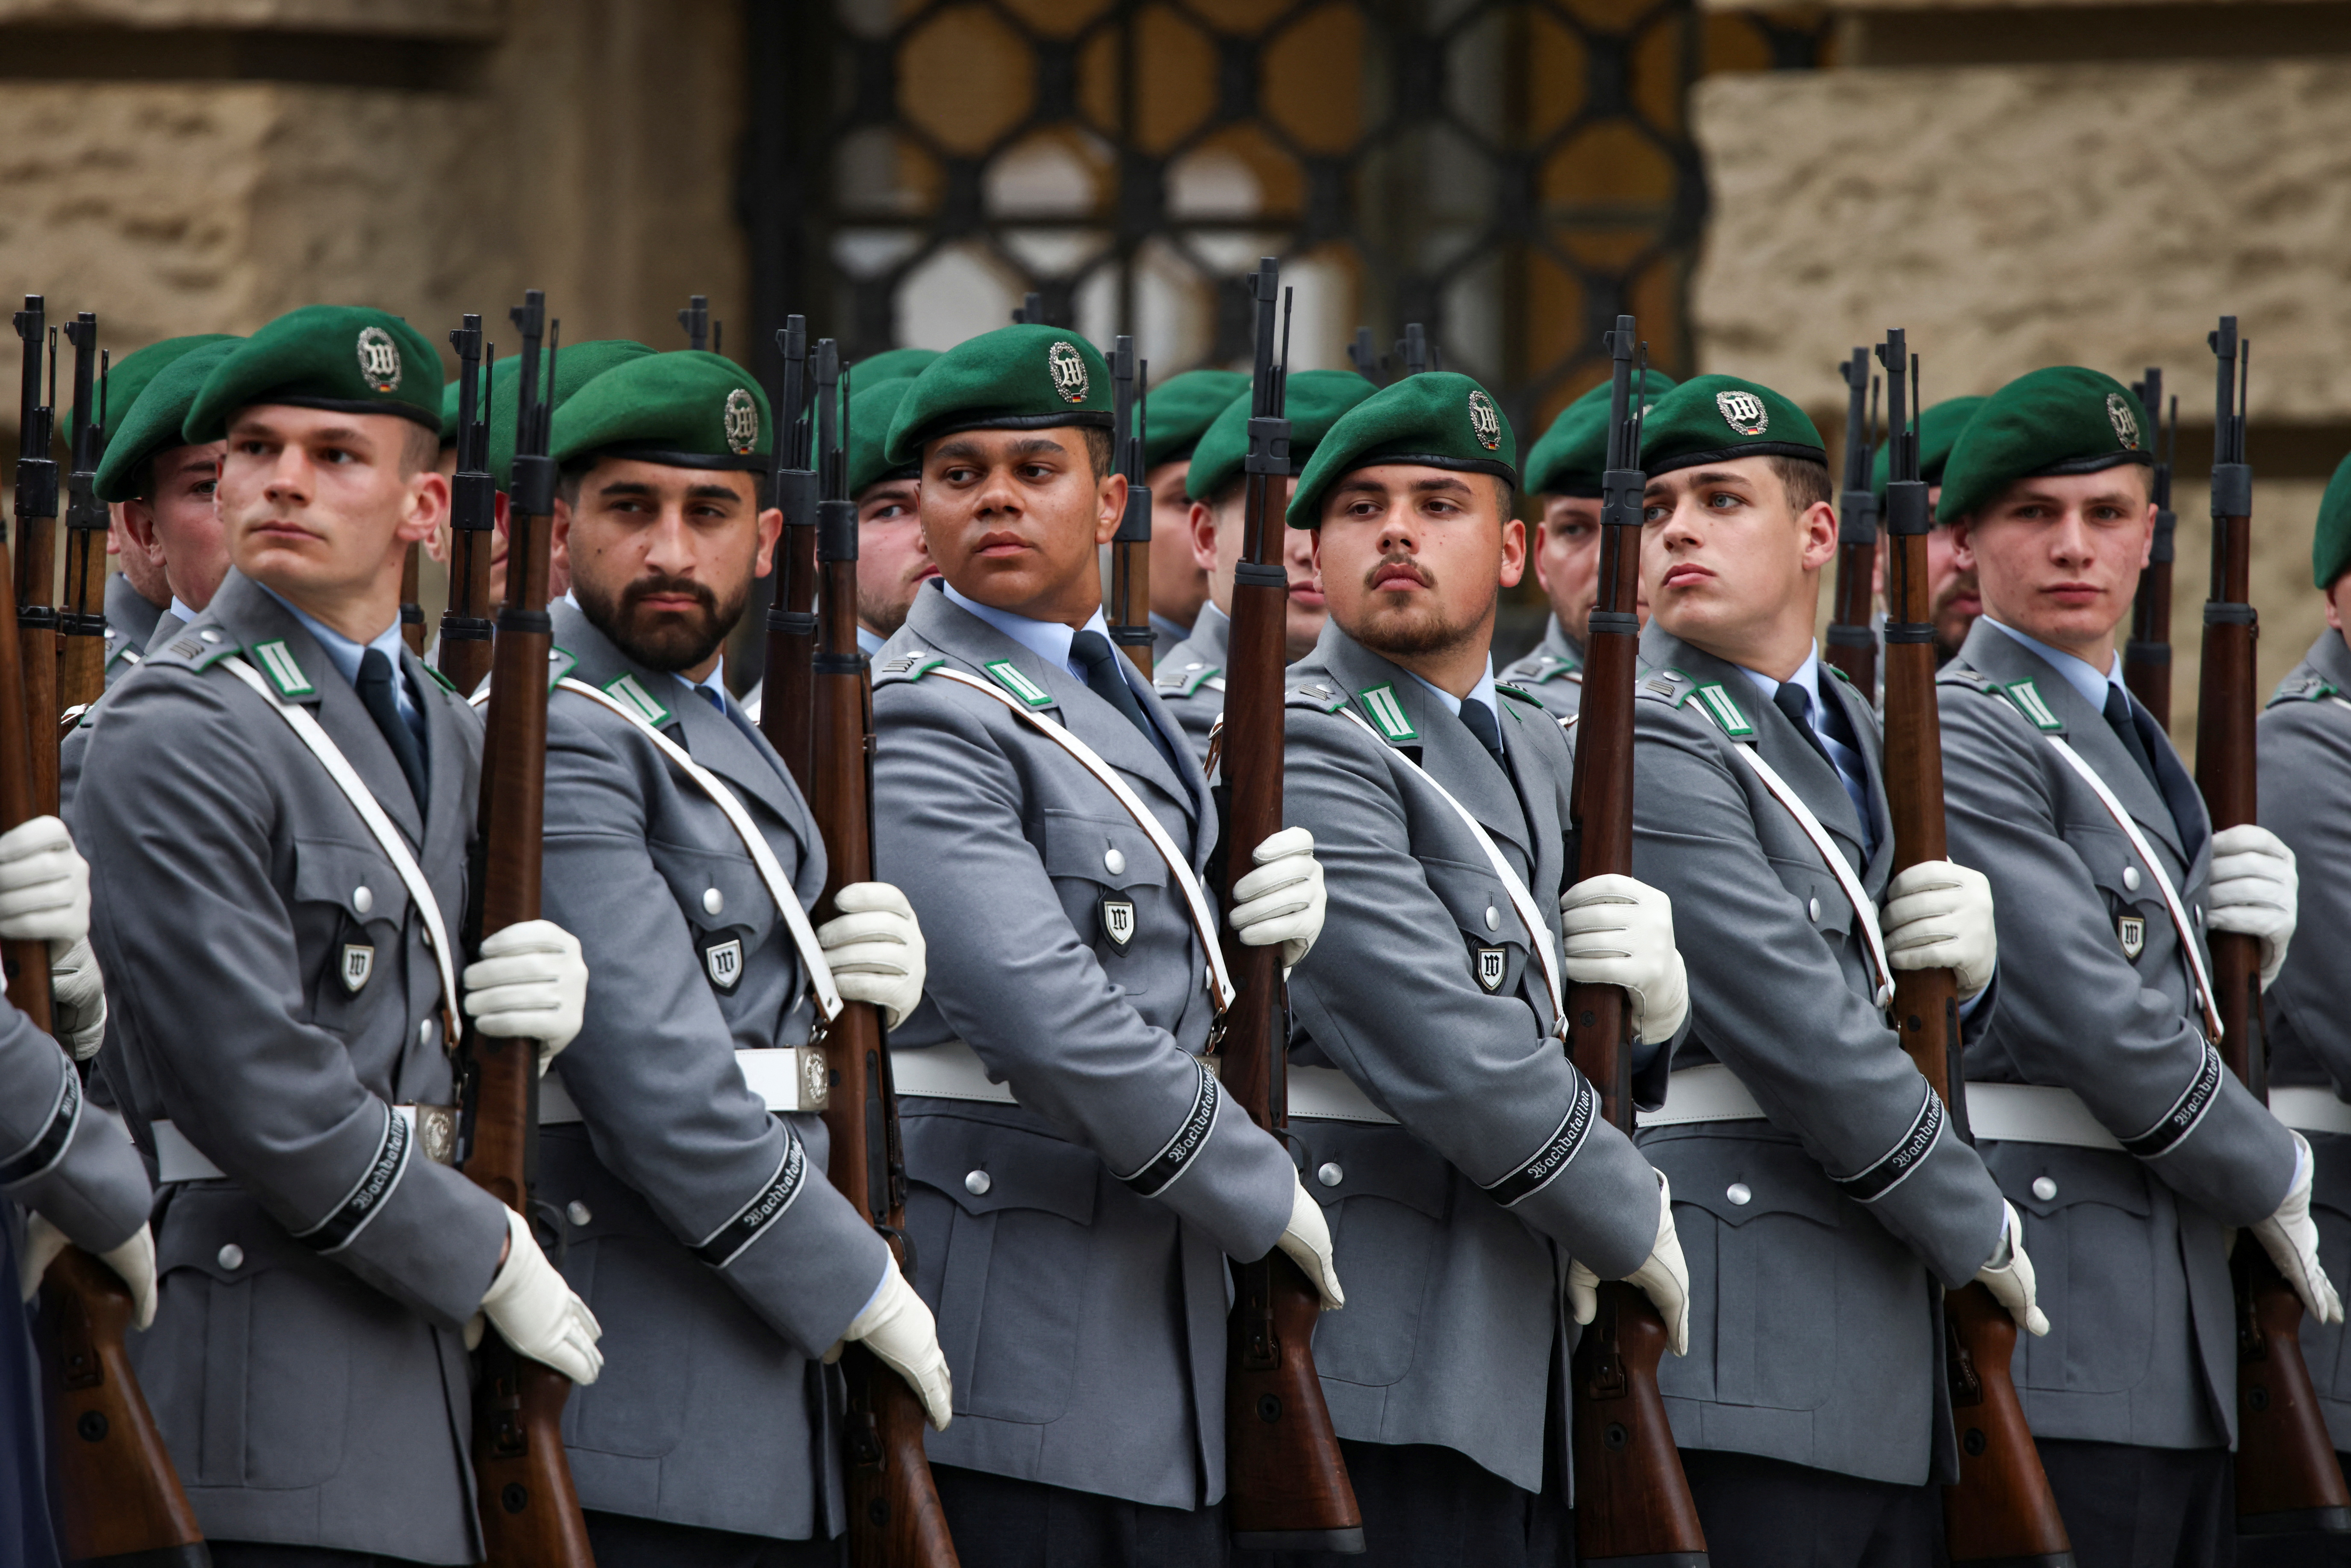 Swearing-in ceremony for new recruits, in Berlin